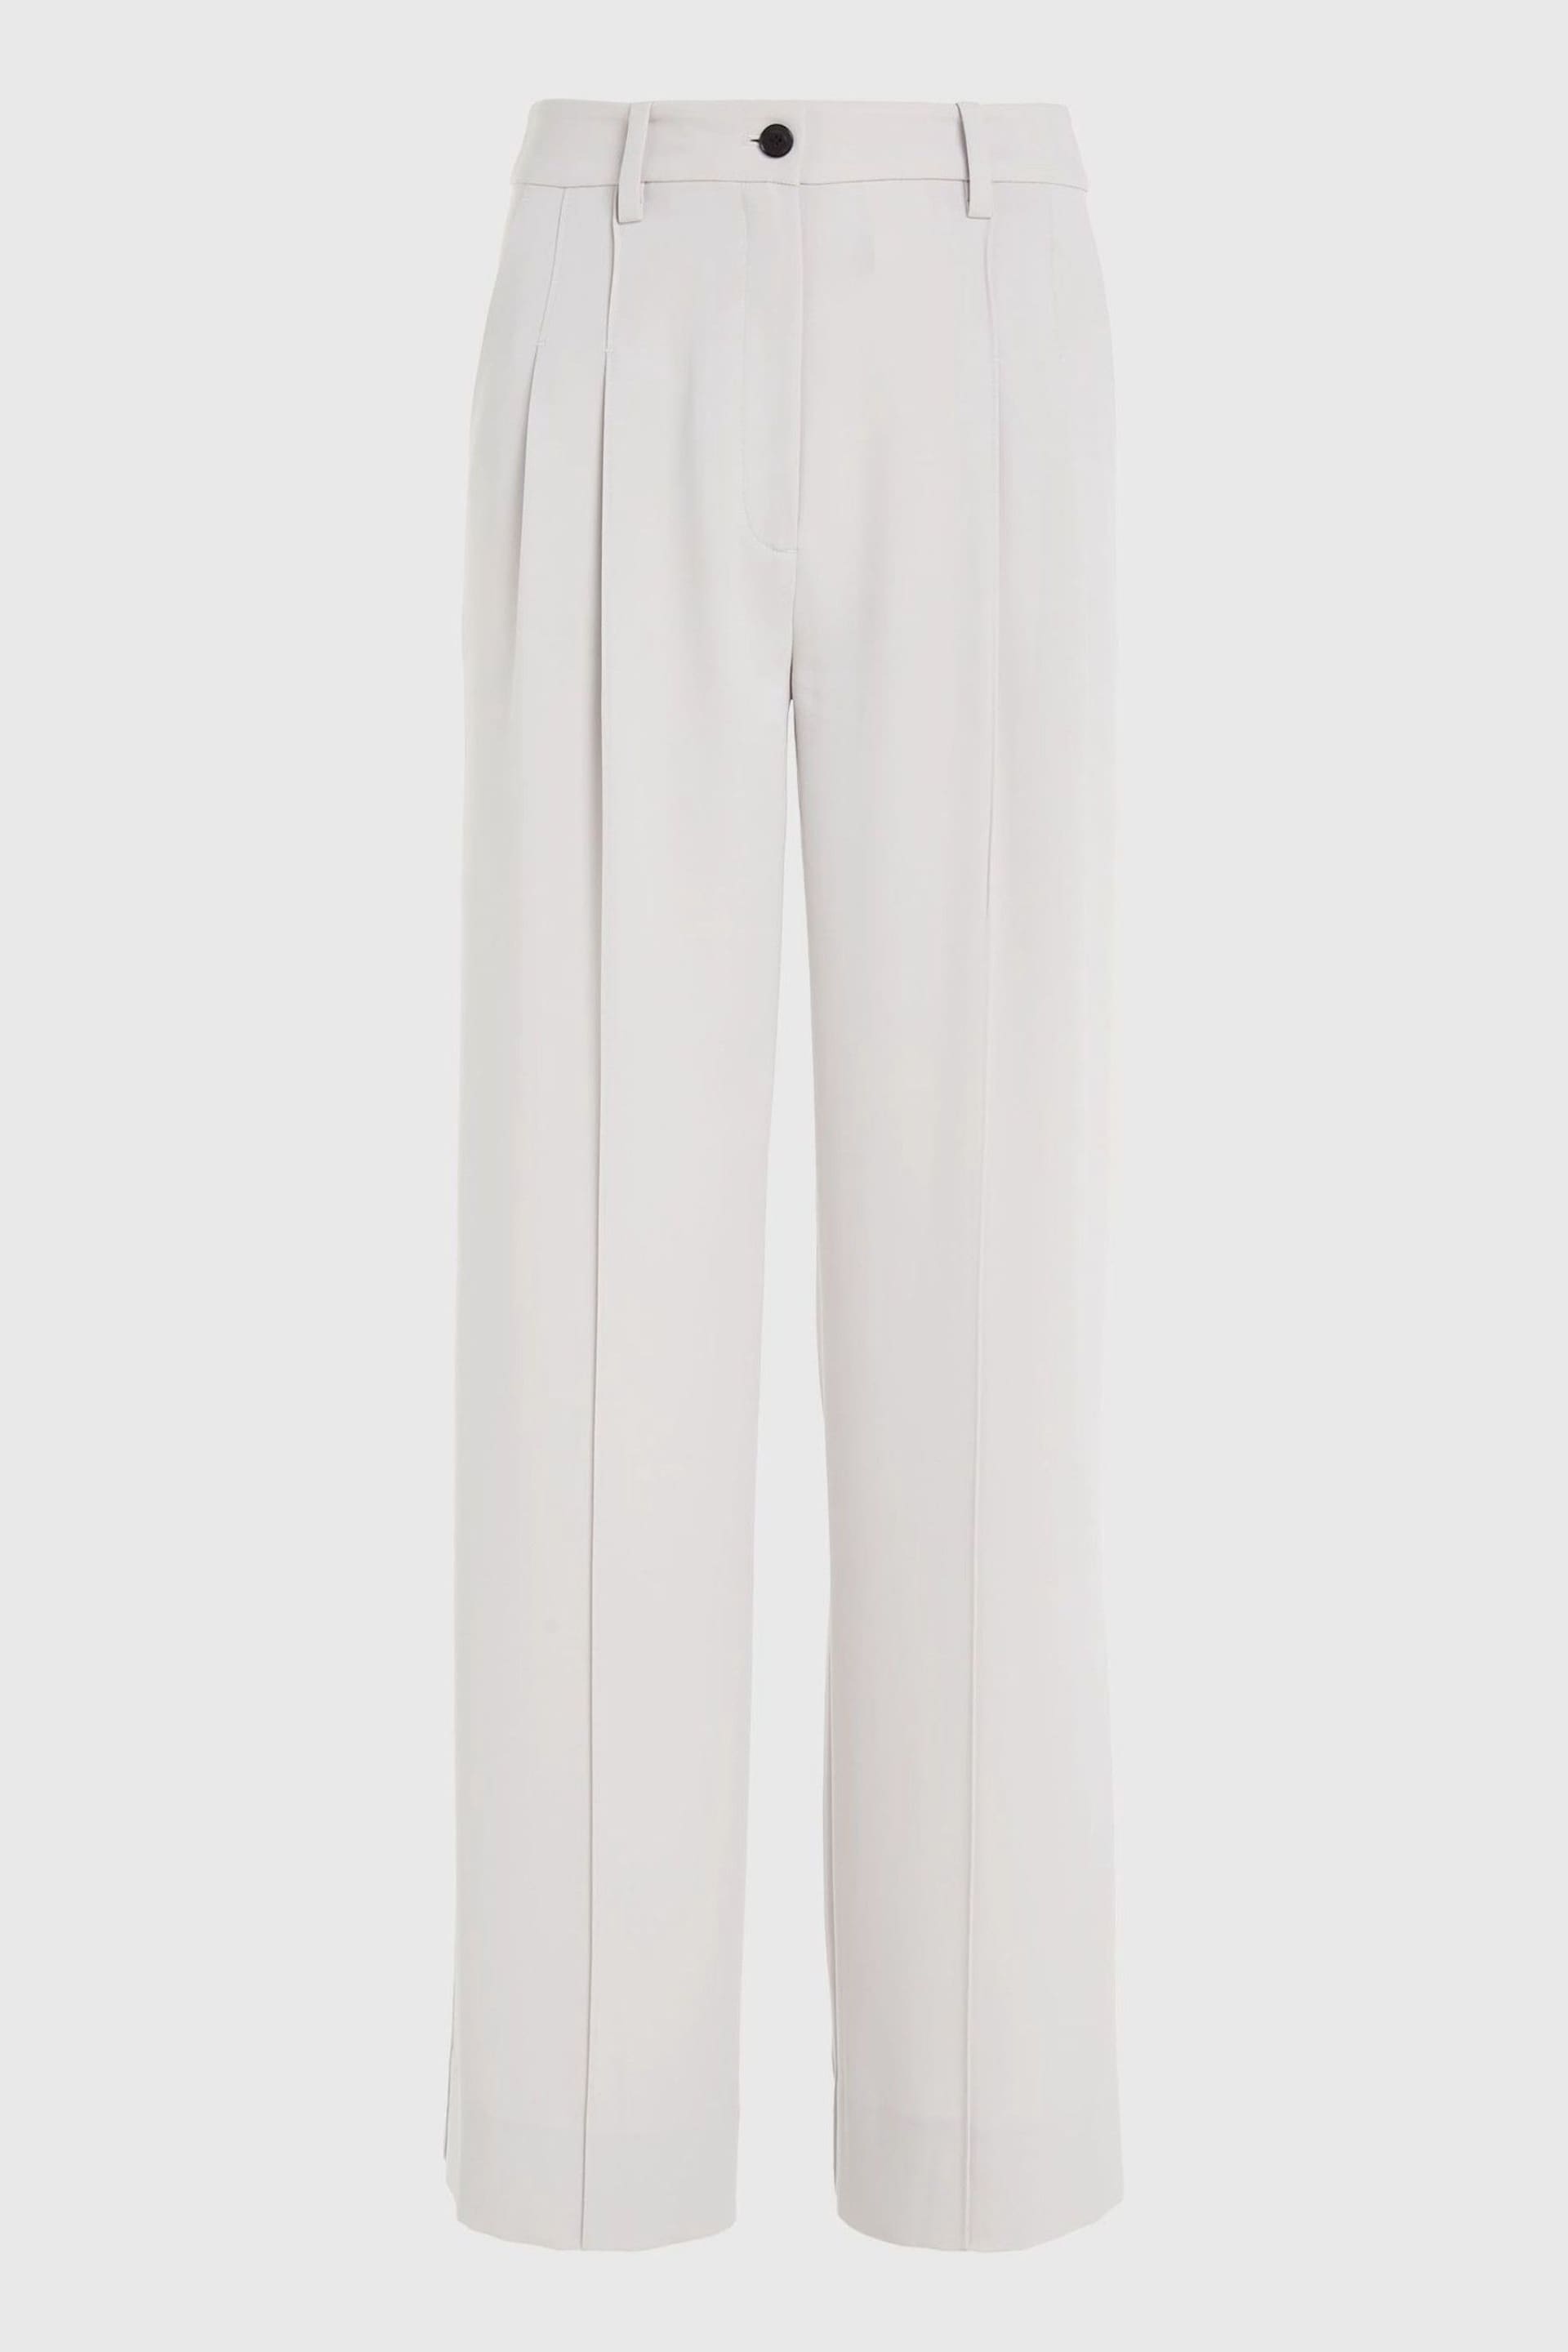 Calvin Klein Grey Wide Trousers - Image 6 of 6